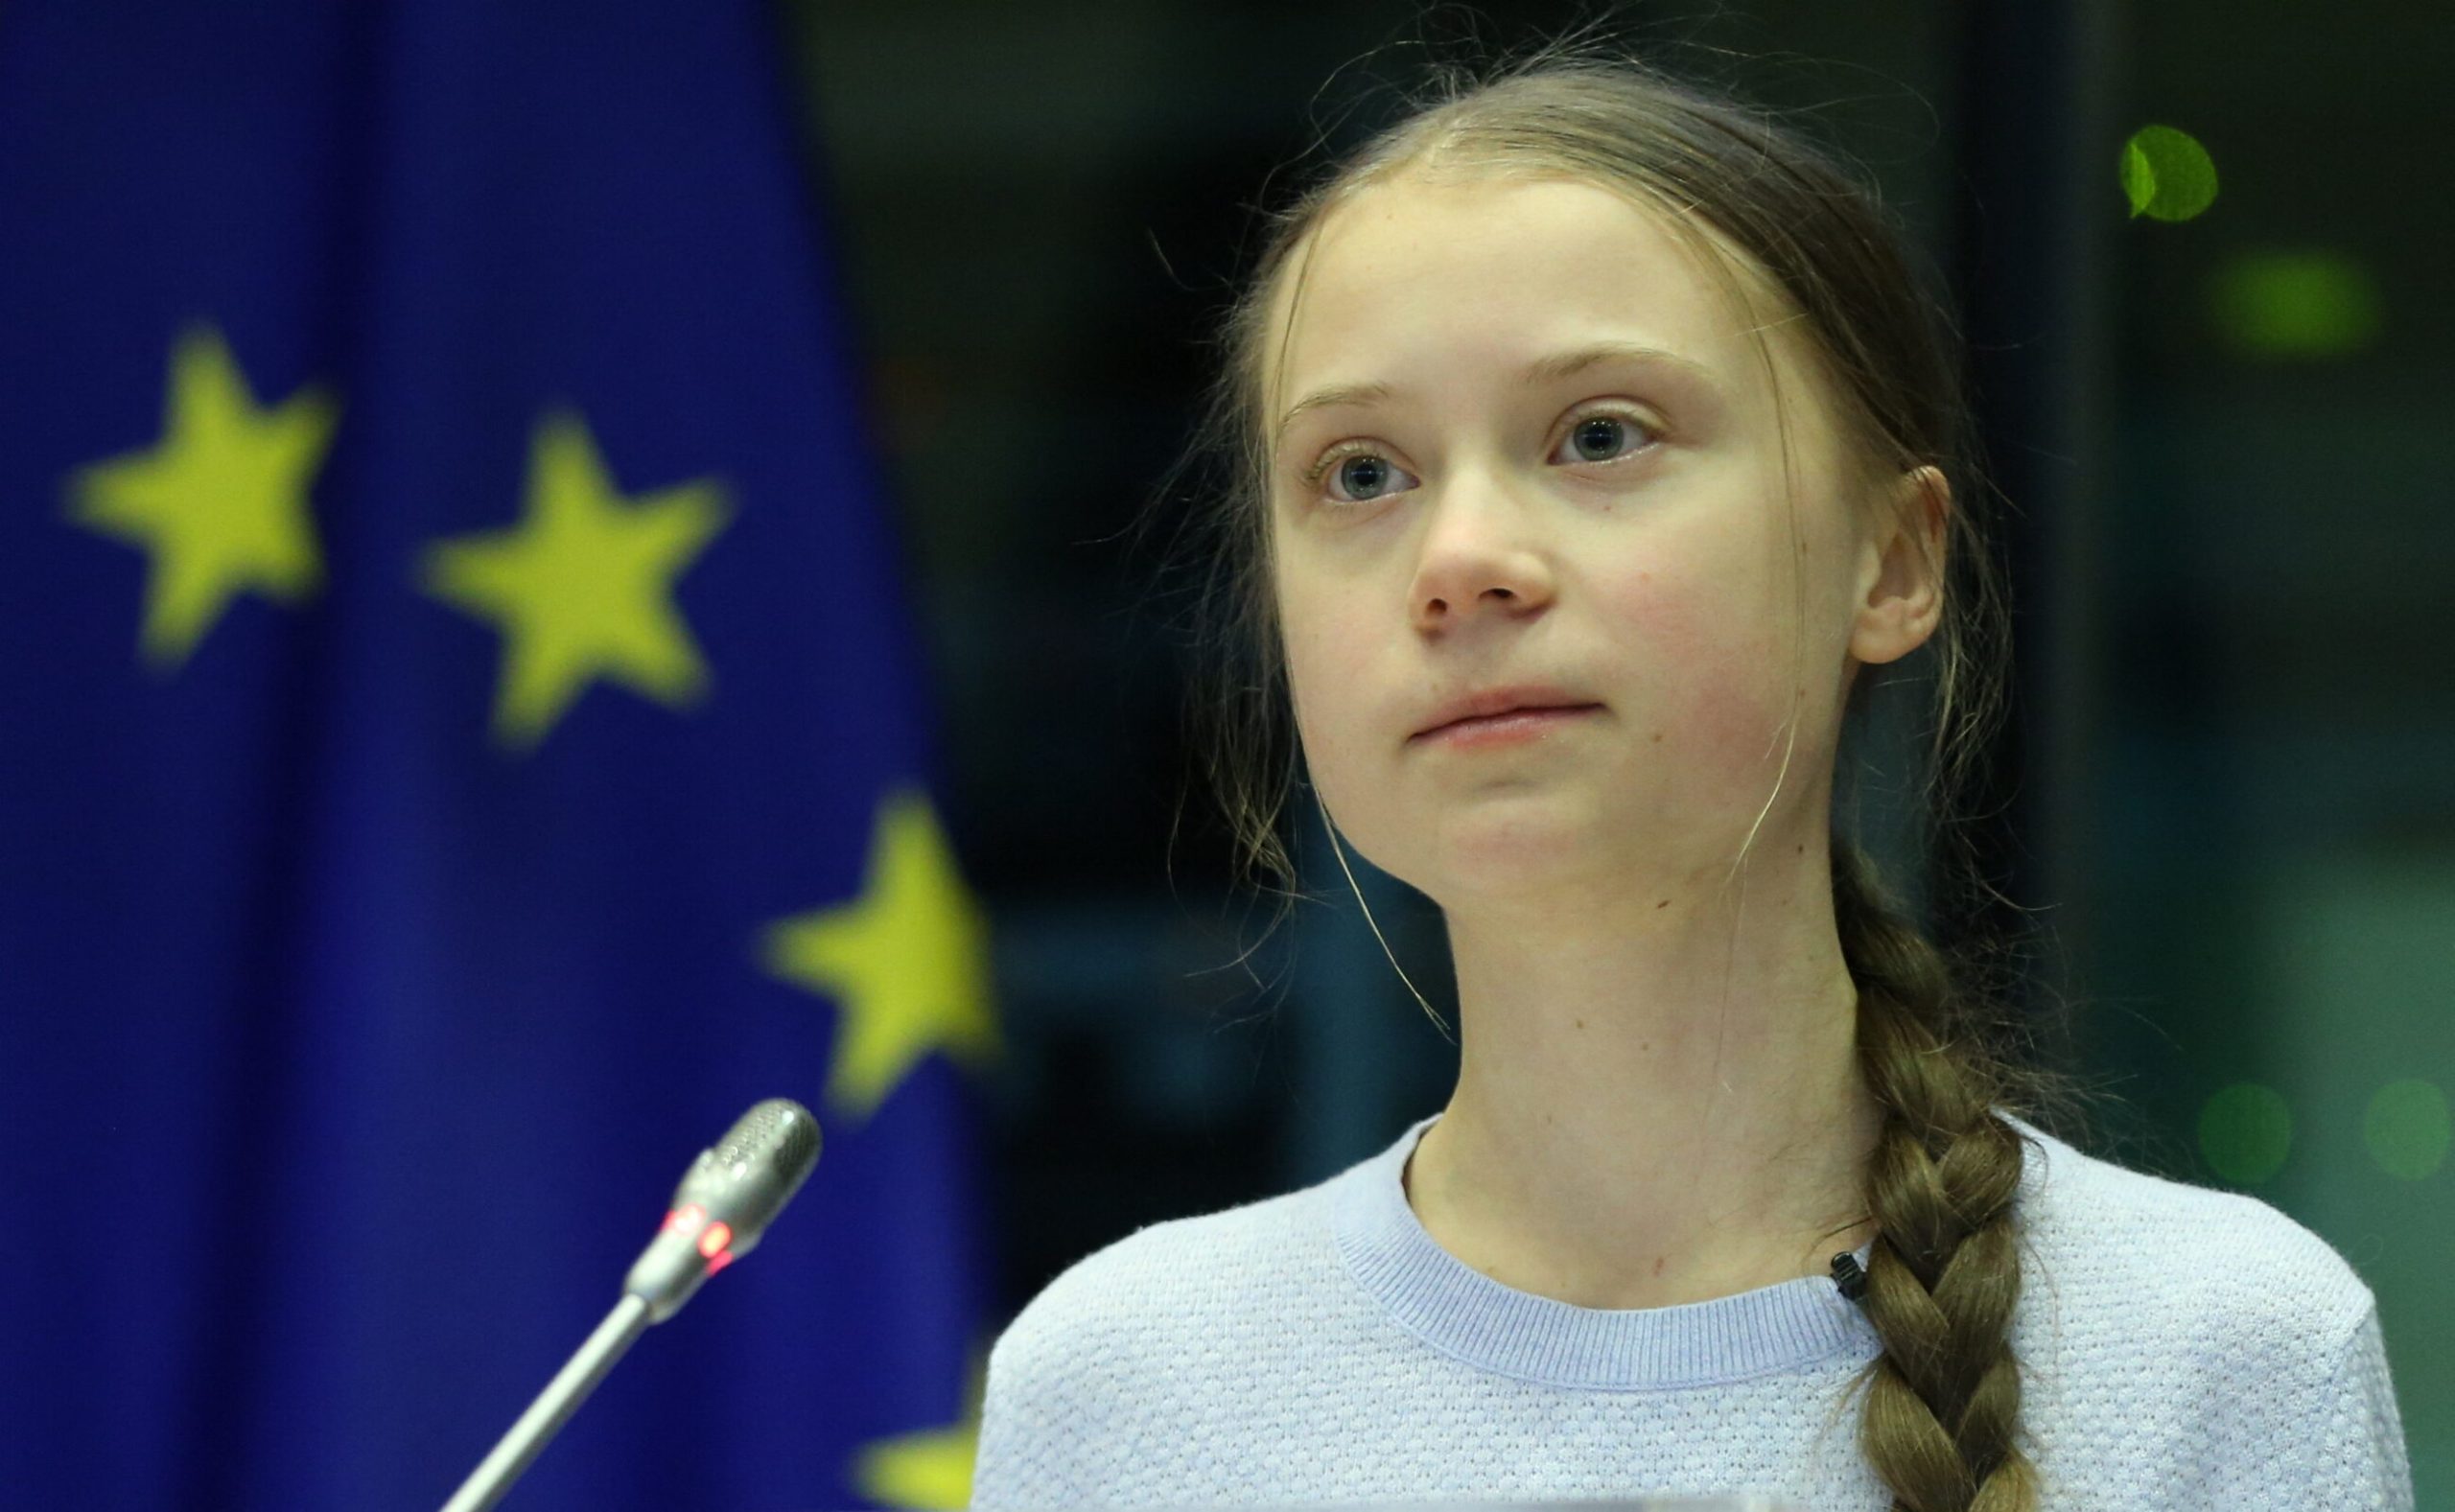 Greta Thunberg raped by an oil company.  The stickers caused a storm